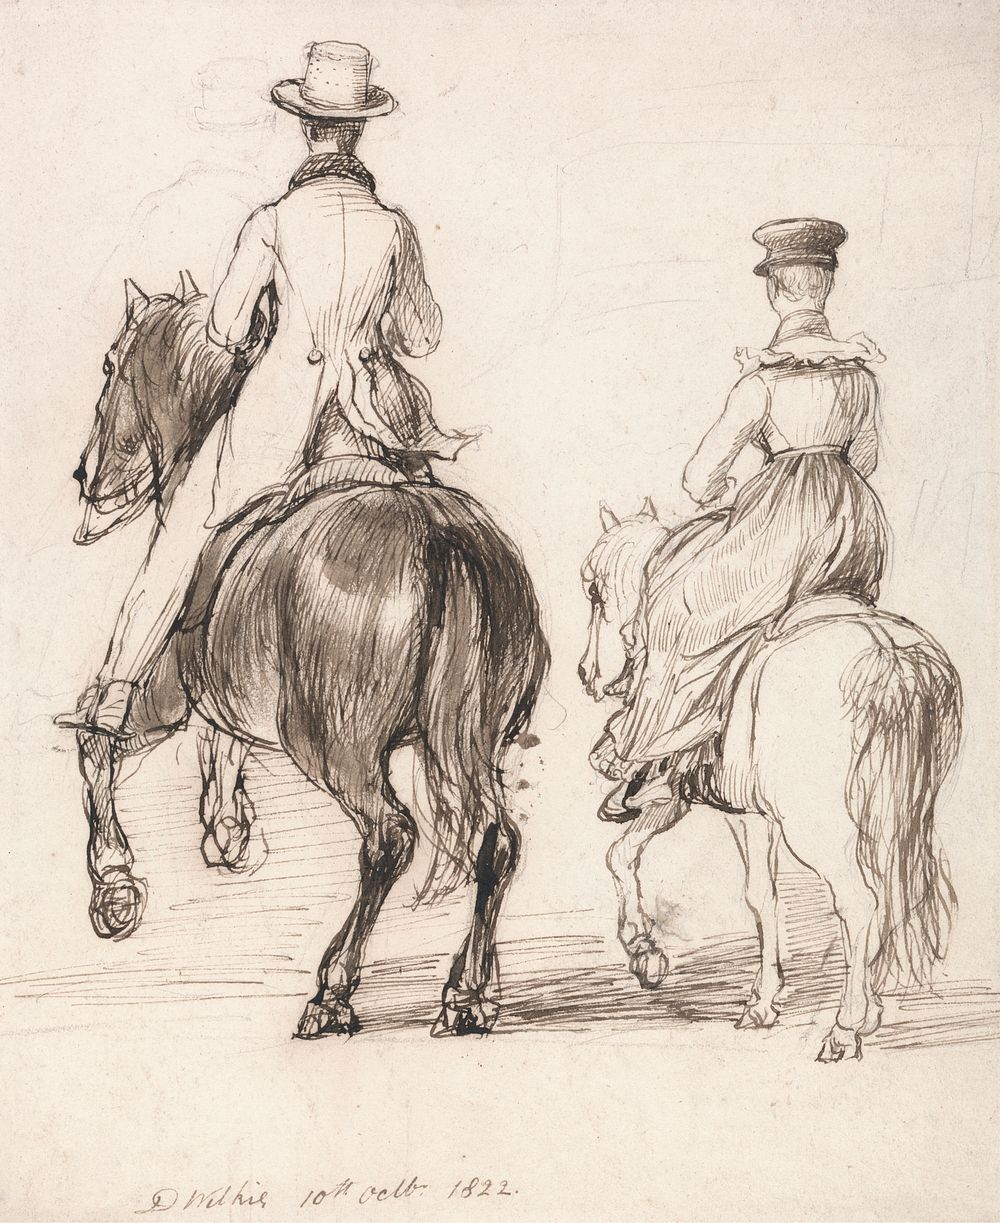 Two Riders Seen from Behind, Oct. 10, 1822